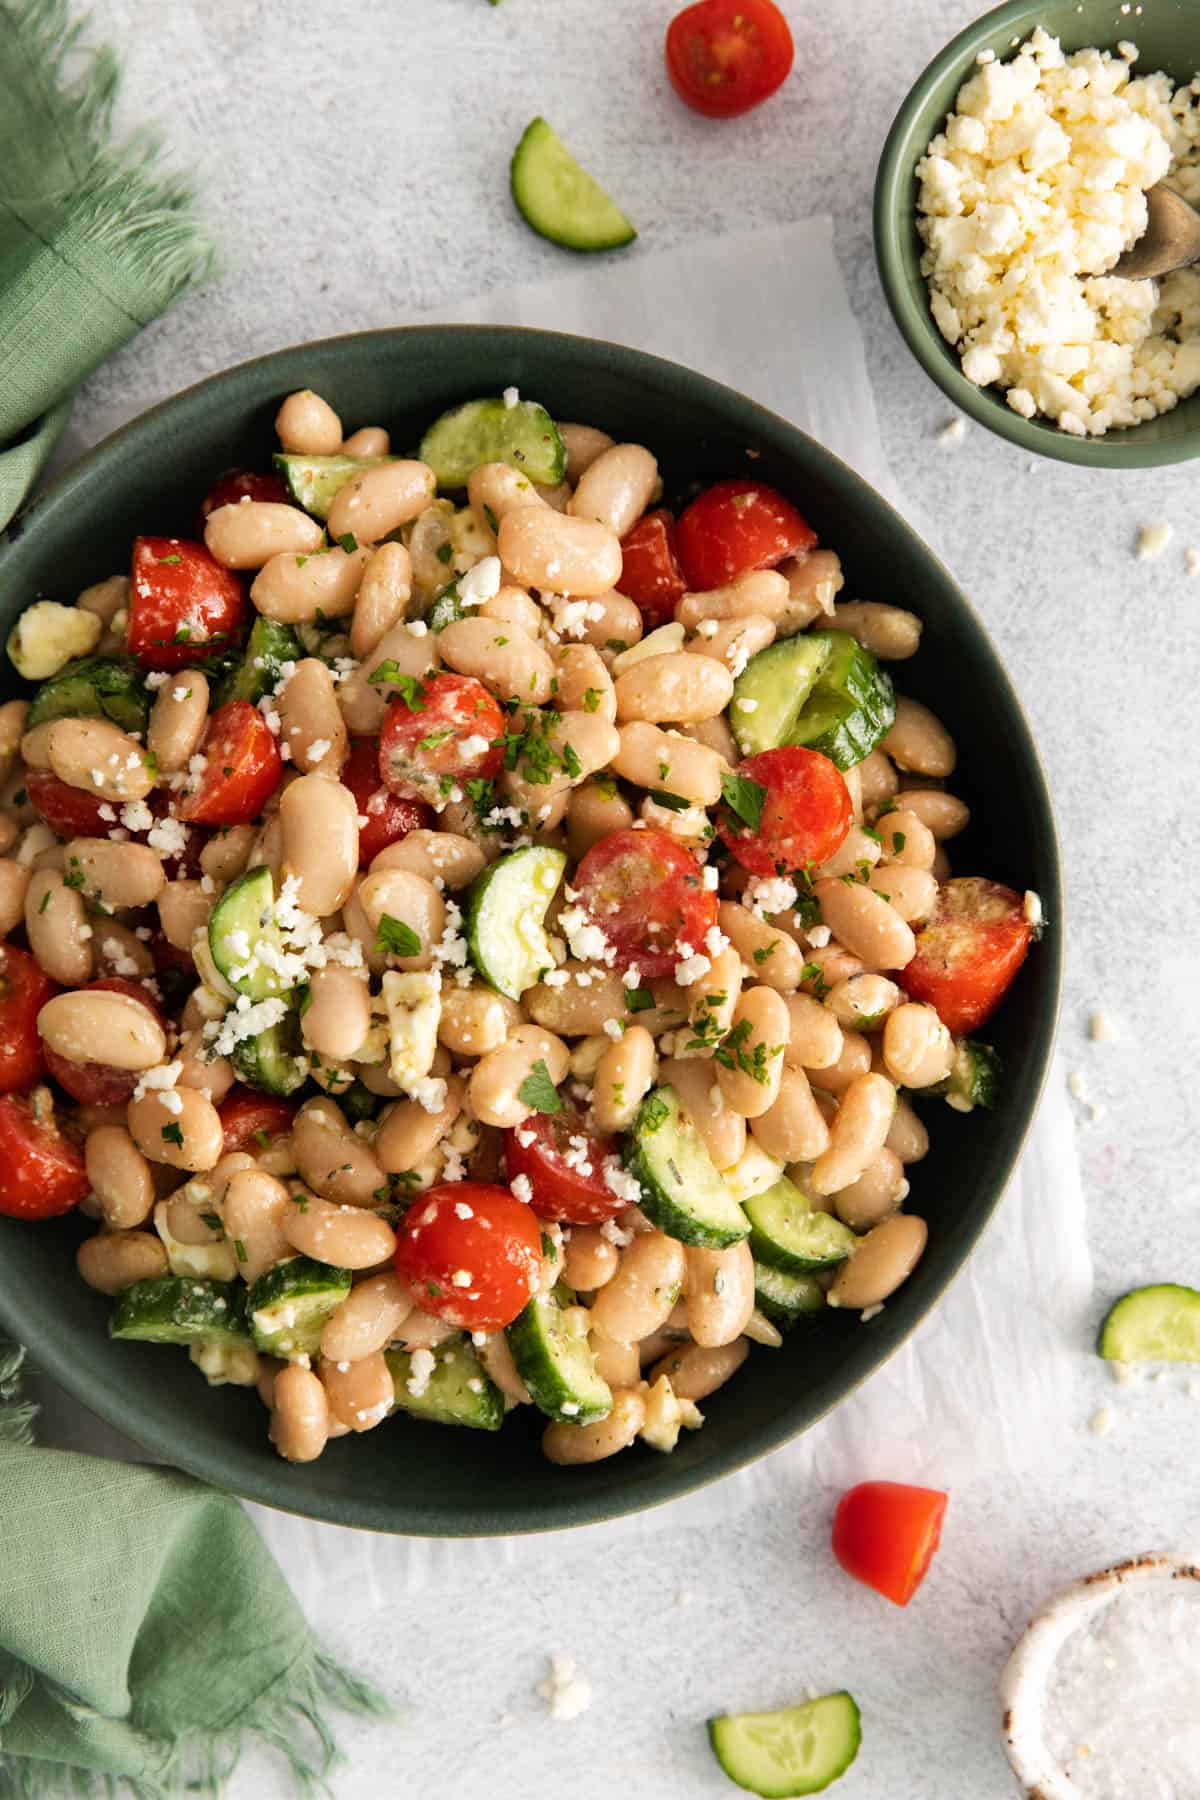 A plate of Mediterranean salad with white beans, cucumbers, tomatoes, and feta cheese.